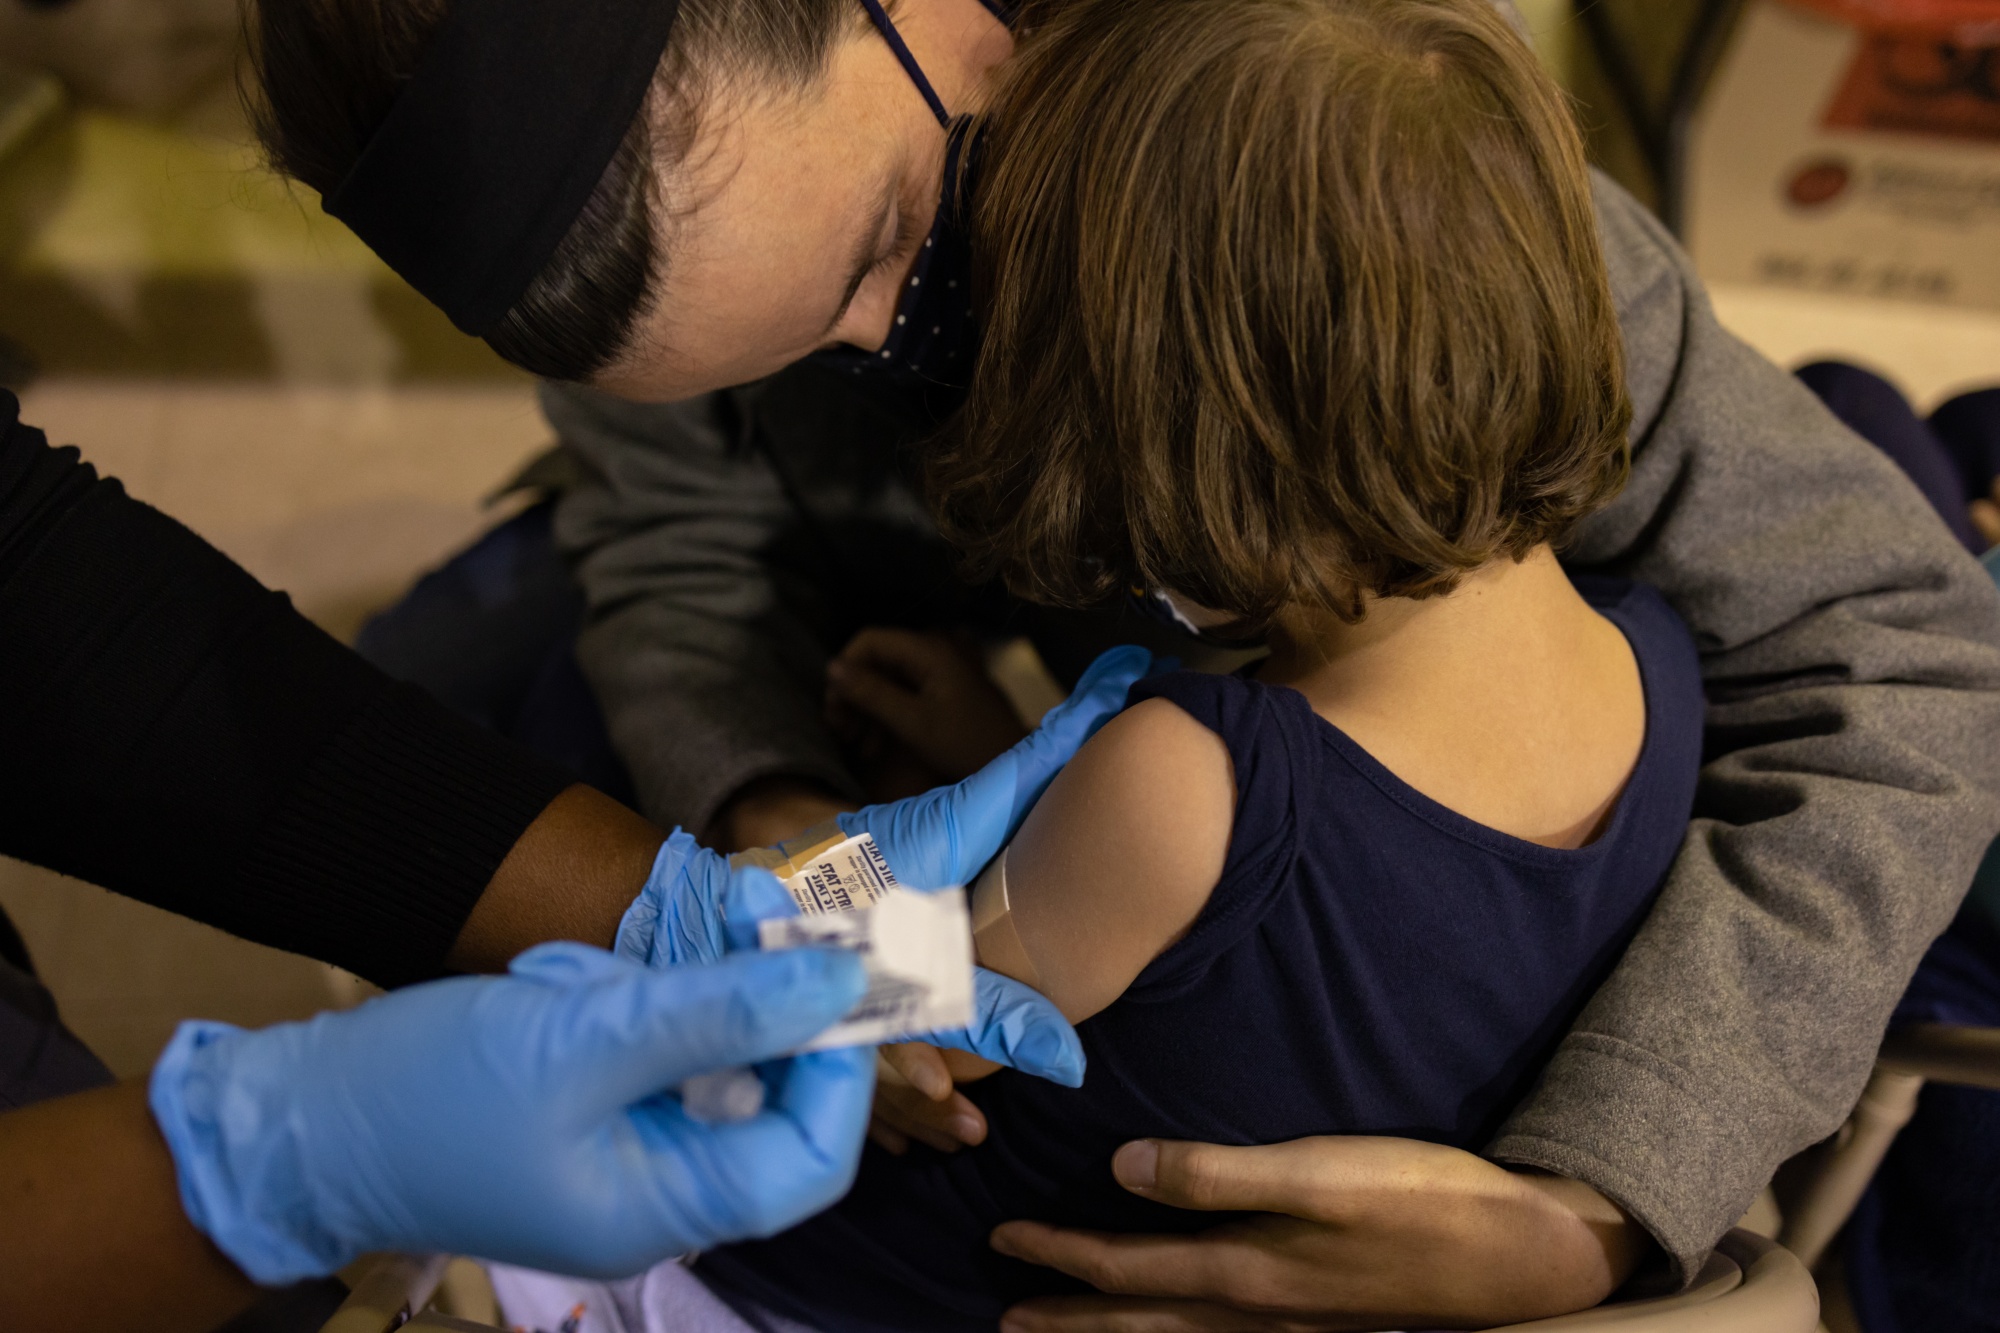 A healthcare worker places a band-aid after administering a dose of the Covid-19 vaccine to a child in Philadelphia, Pennsylvania.